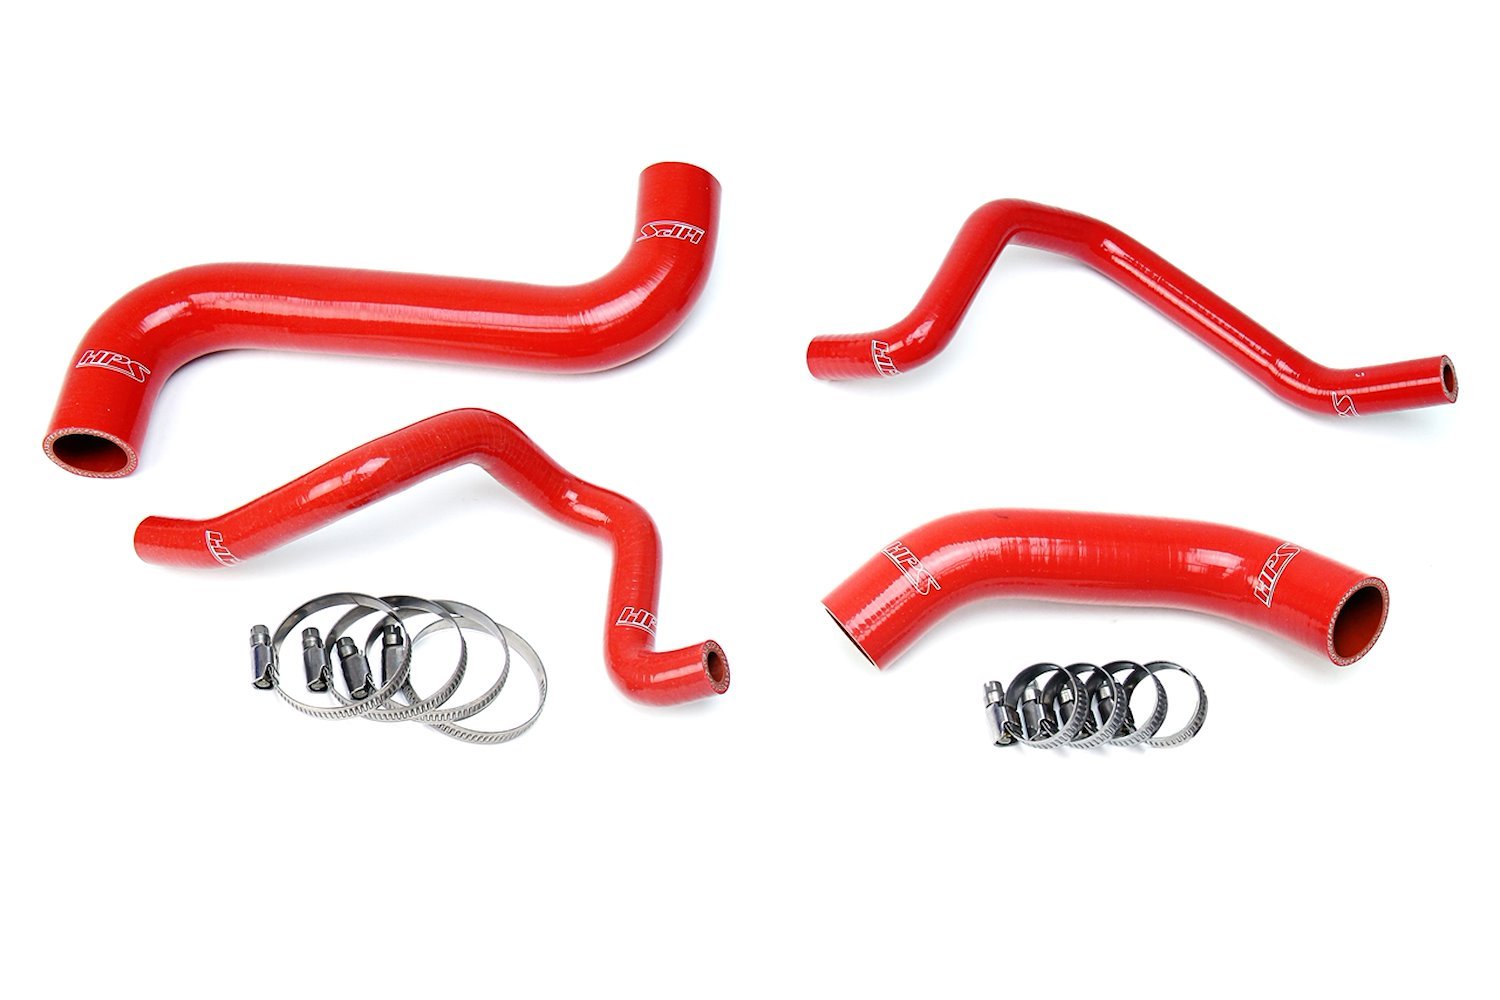 57-1734-RED Coolant Hose Kit, High-Temp 3-Ply Reinforced Silicone, Replace Rubber Radiator Heater Coolant Hoses